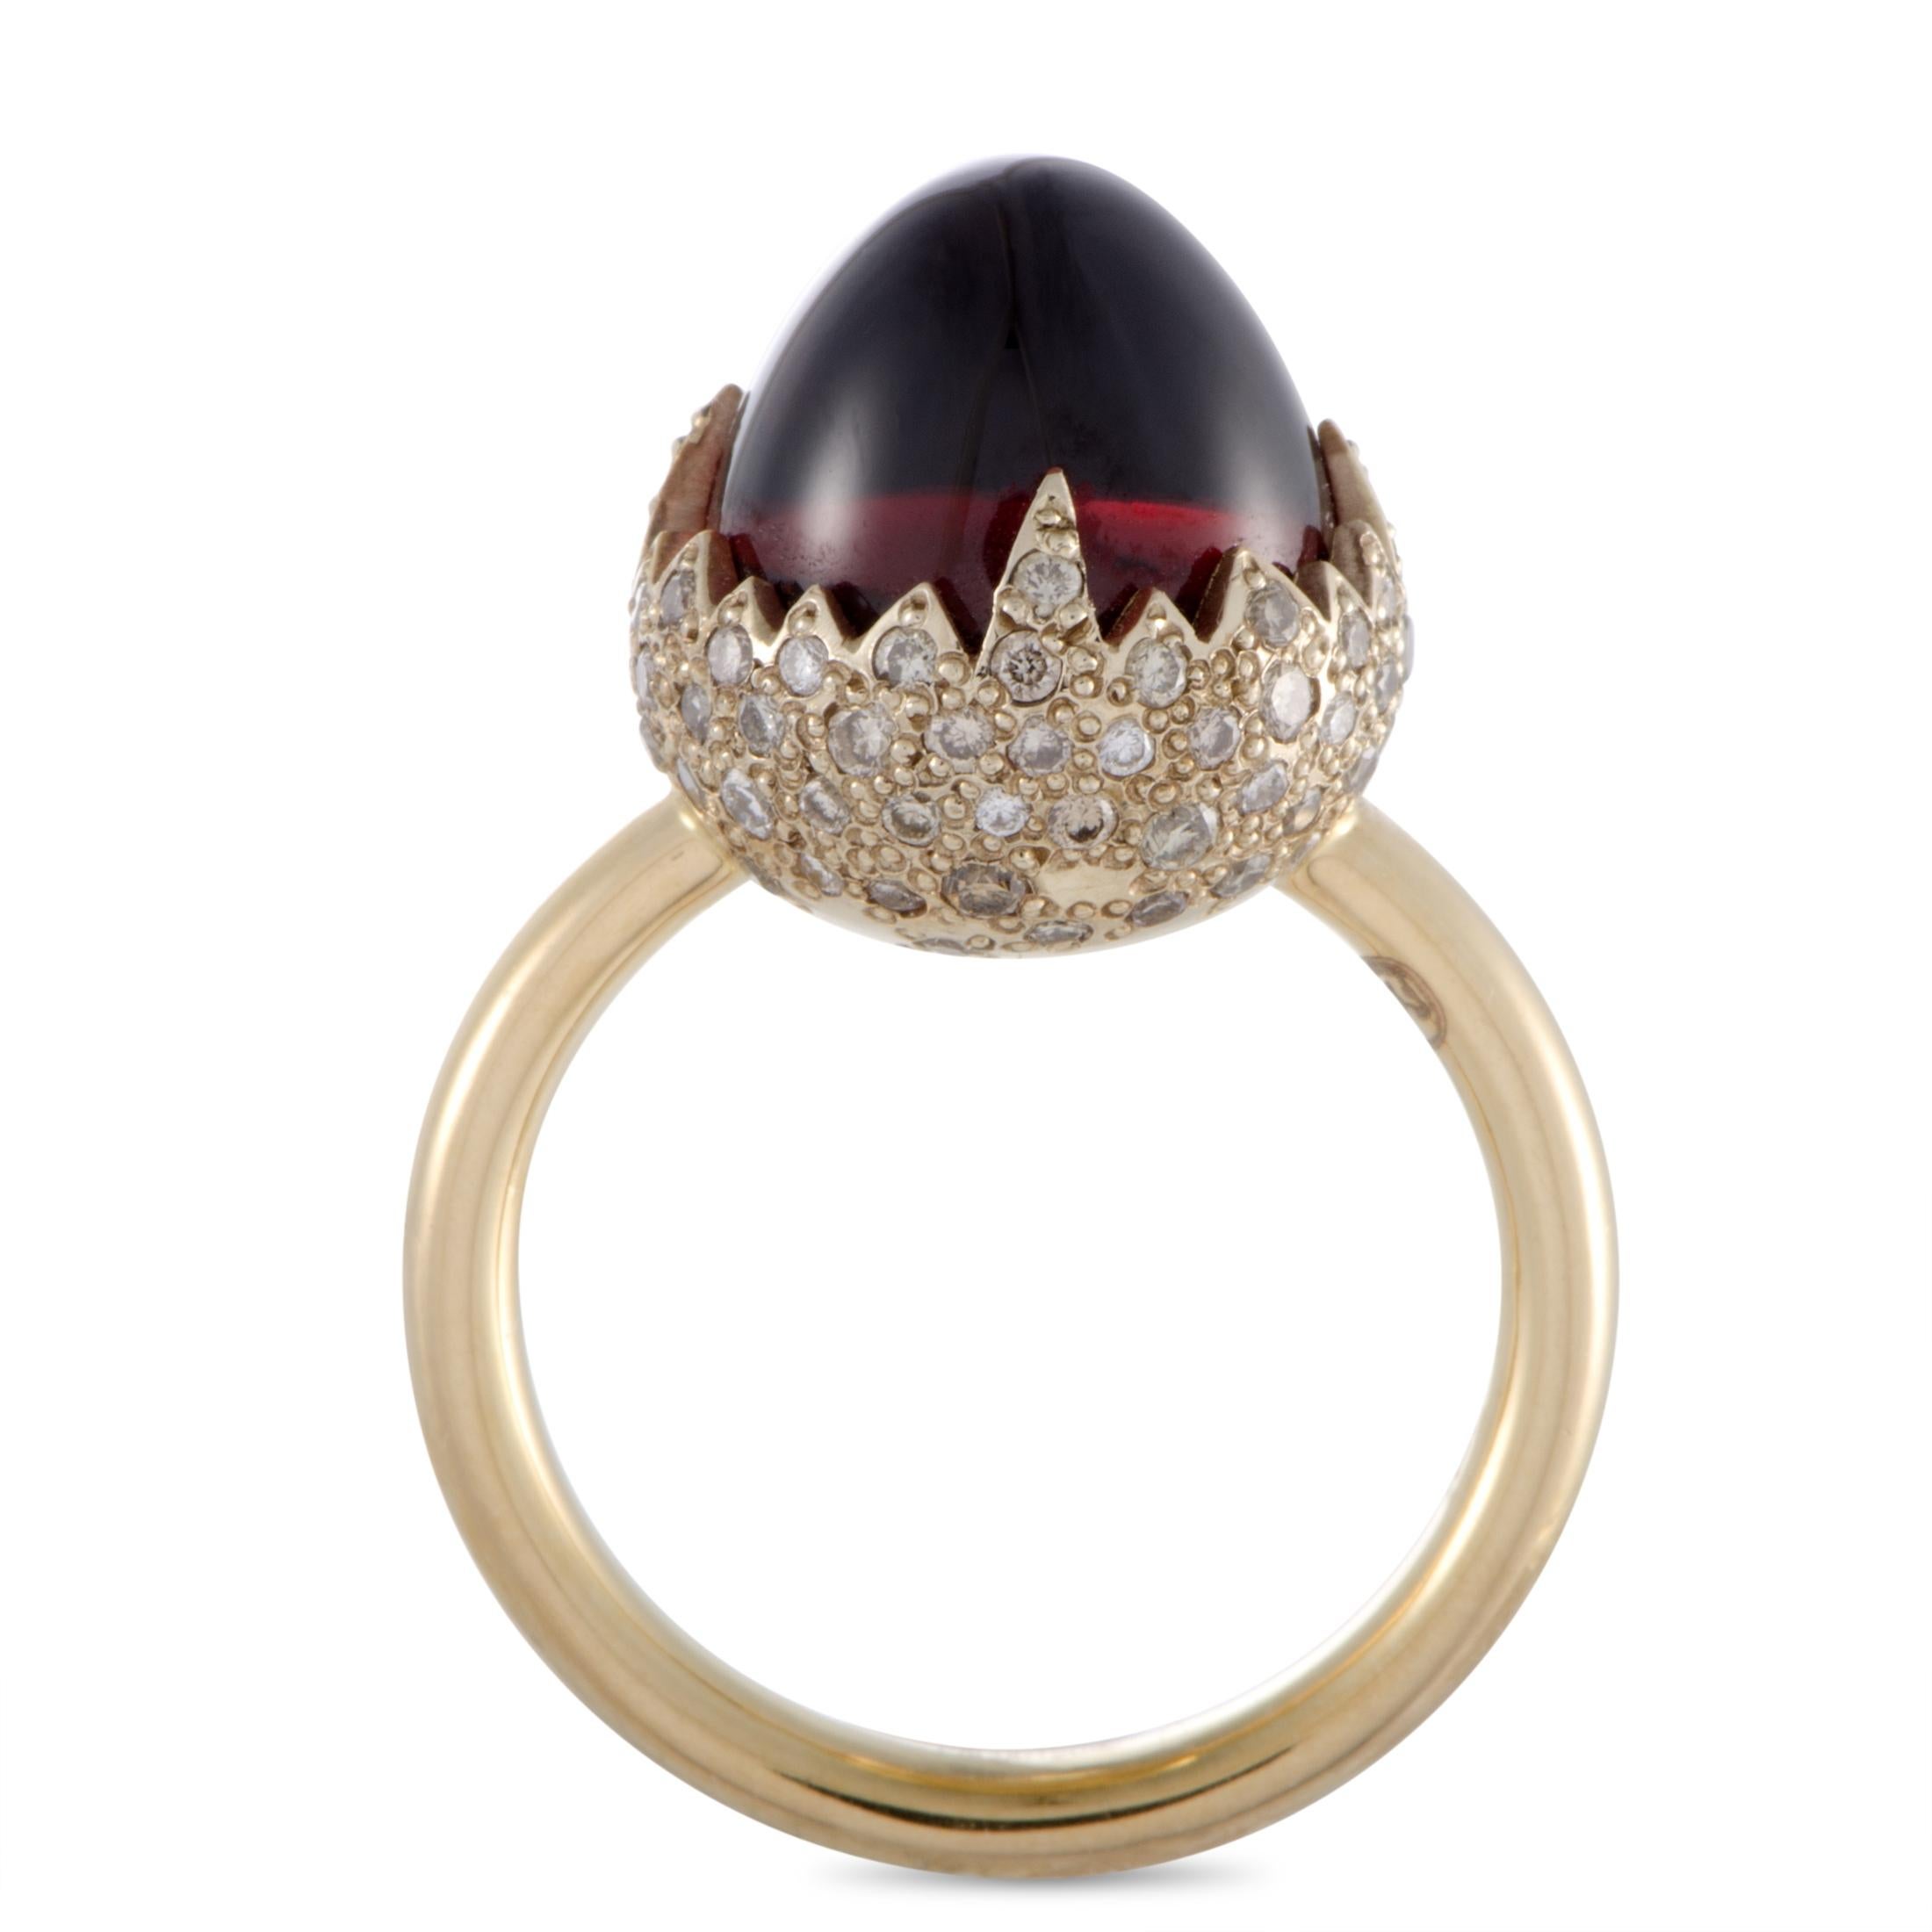 This fabulous 18K yellow gold ring by Pomellato boasts an incredibly extravagant appeal. The beautifully ring is embellished with a sublime garnet and 0.59ct of sparkling diamonds
Ring Top Dimensions: 12mm x 12mm